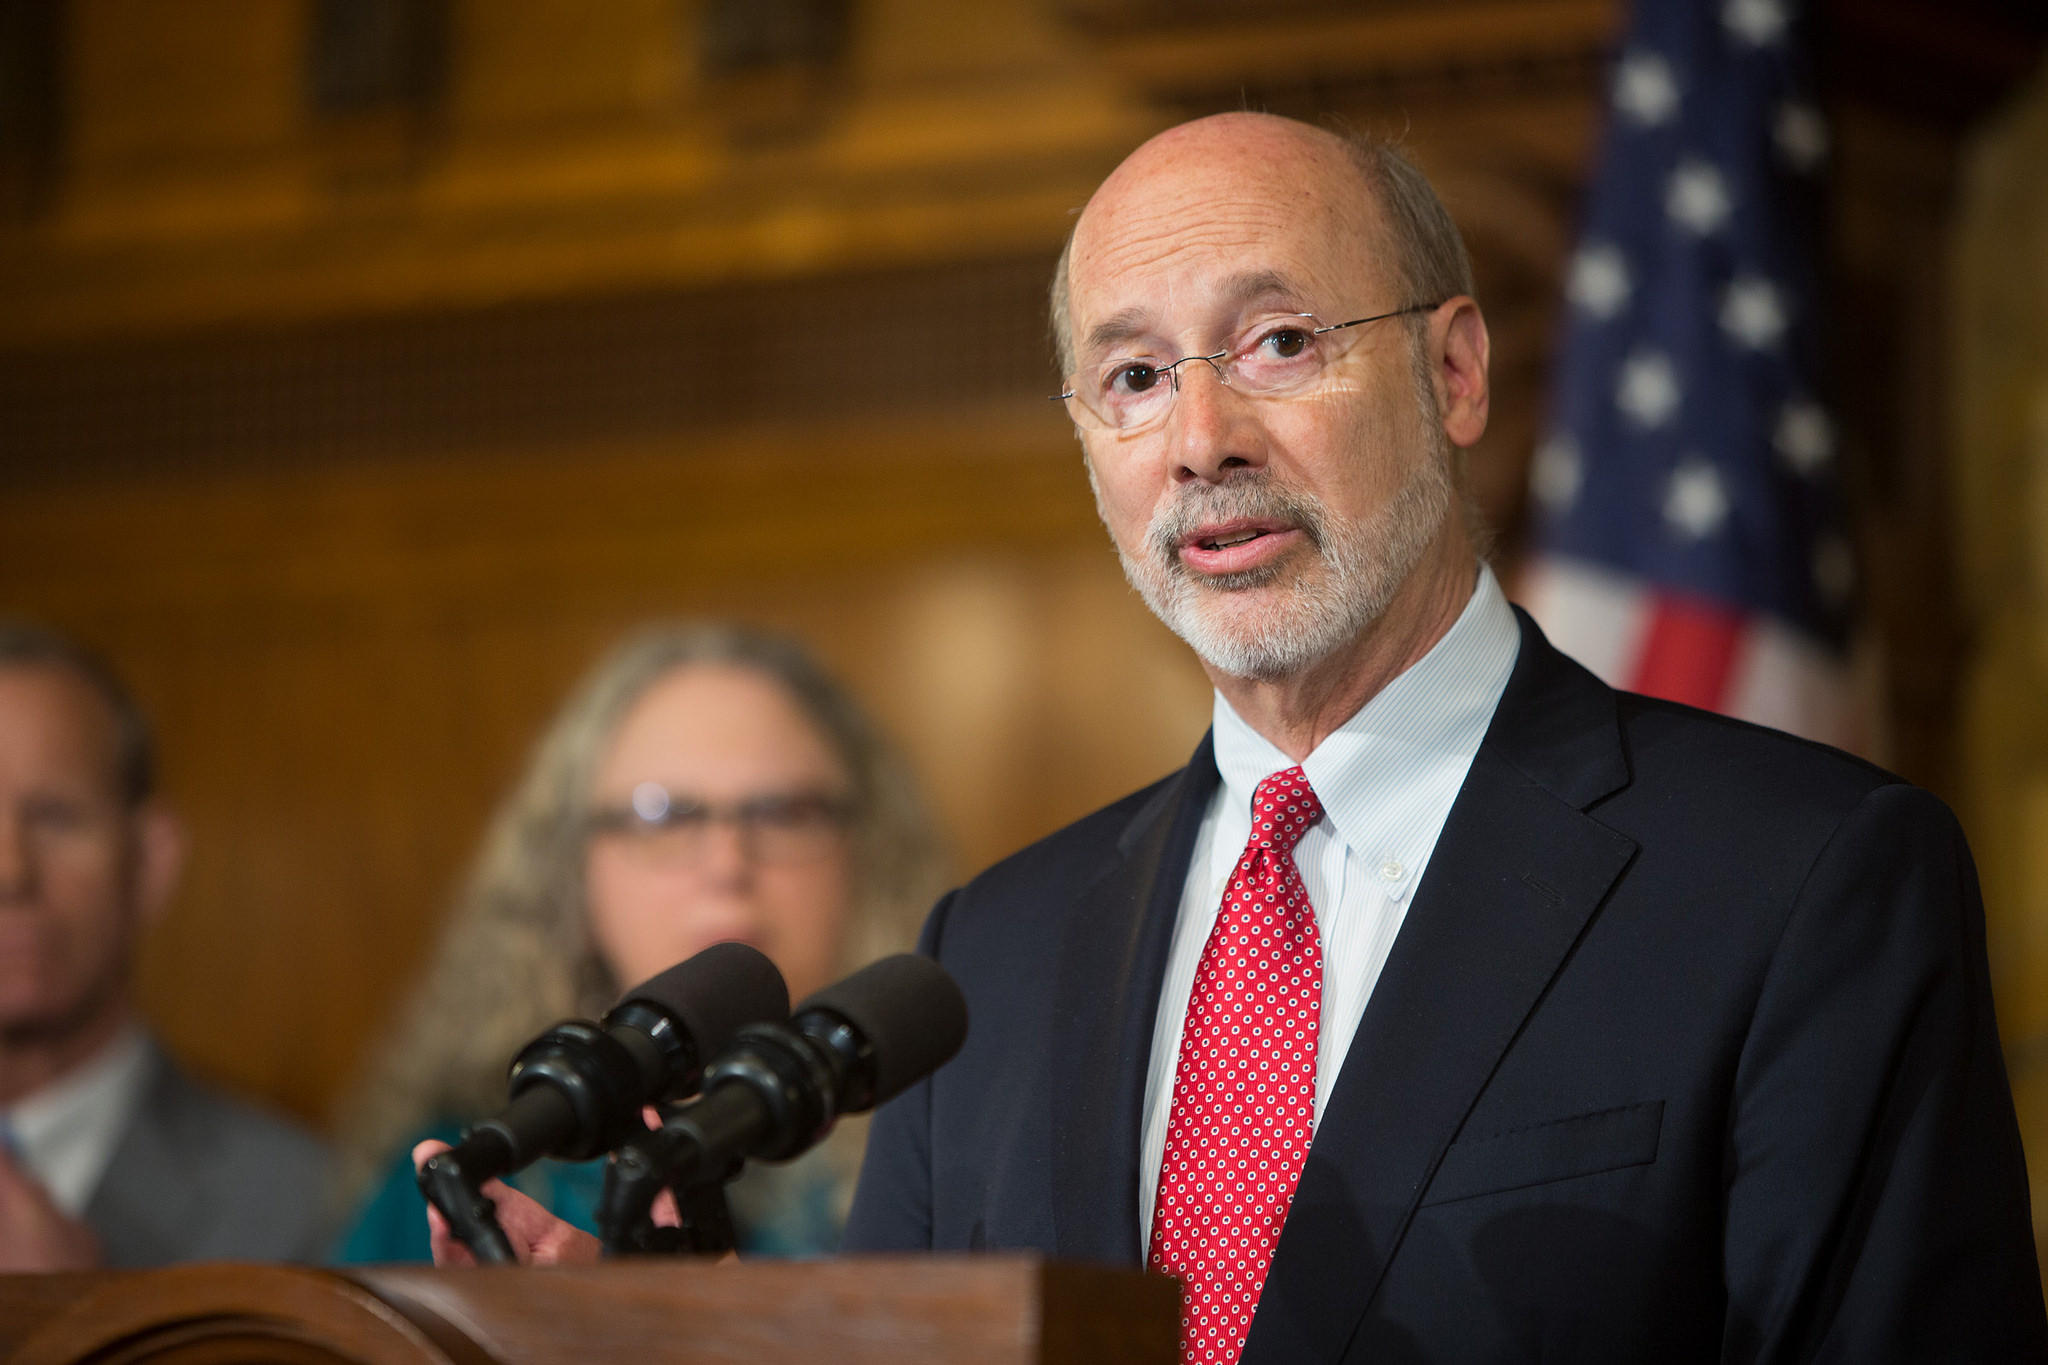 In which state did Tom Wolf run for governor?